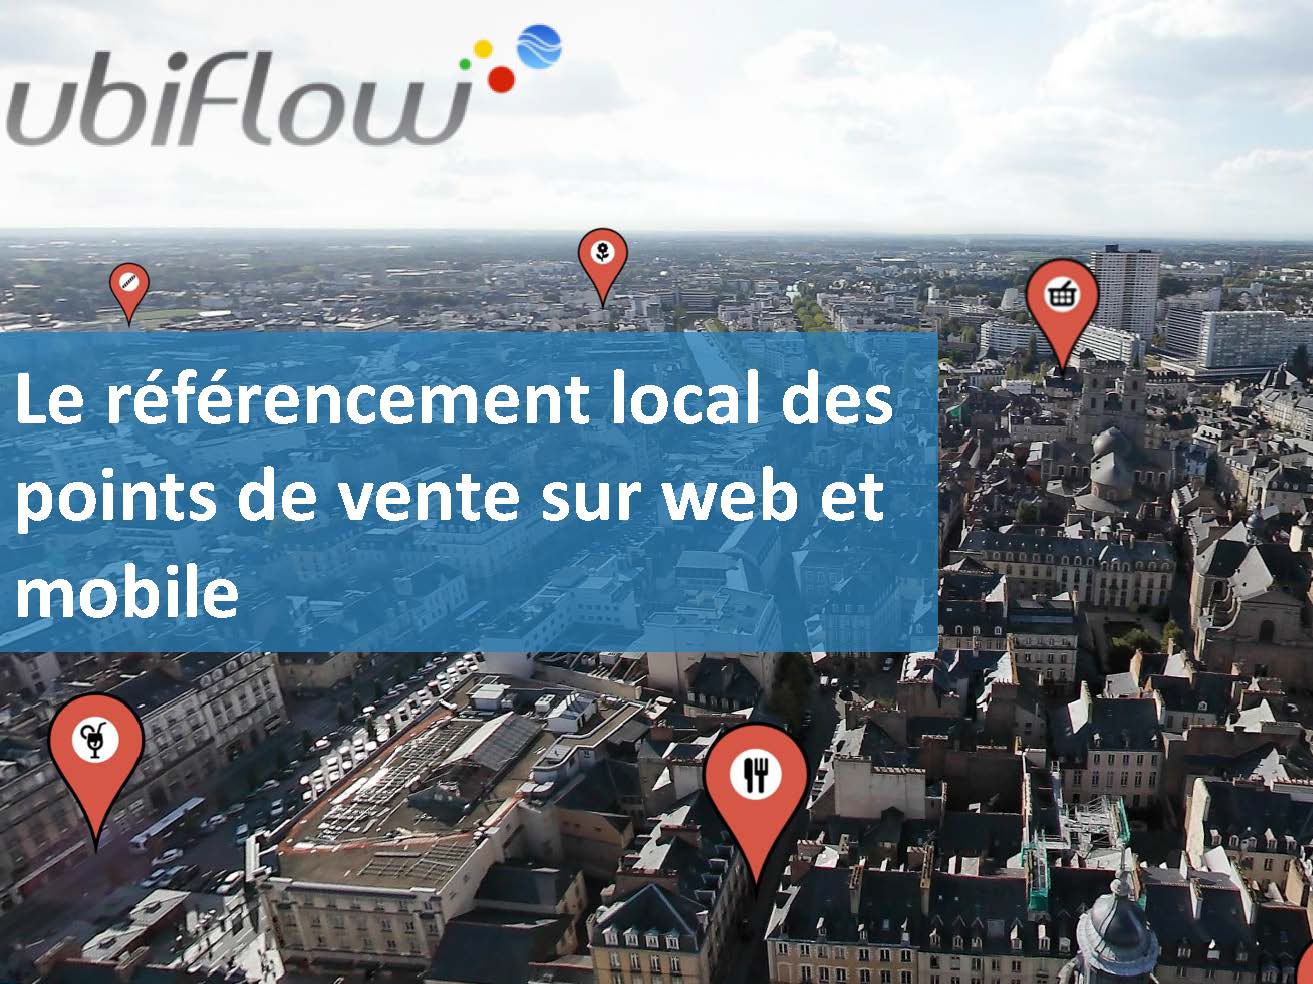 ubiflow referencement local